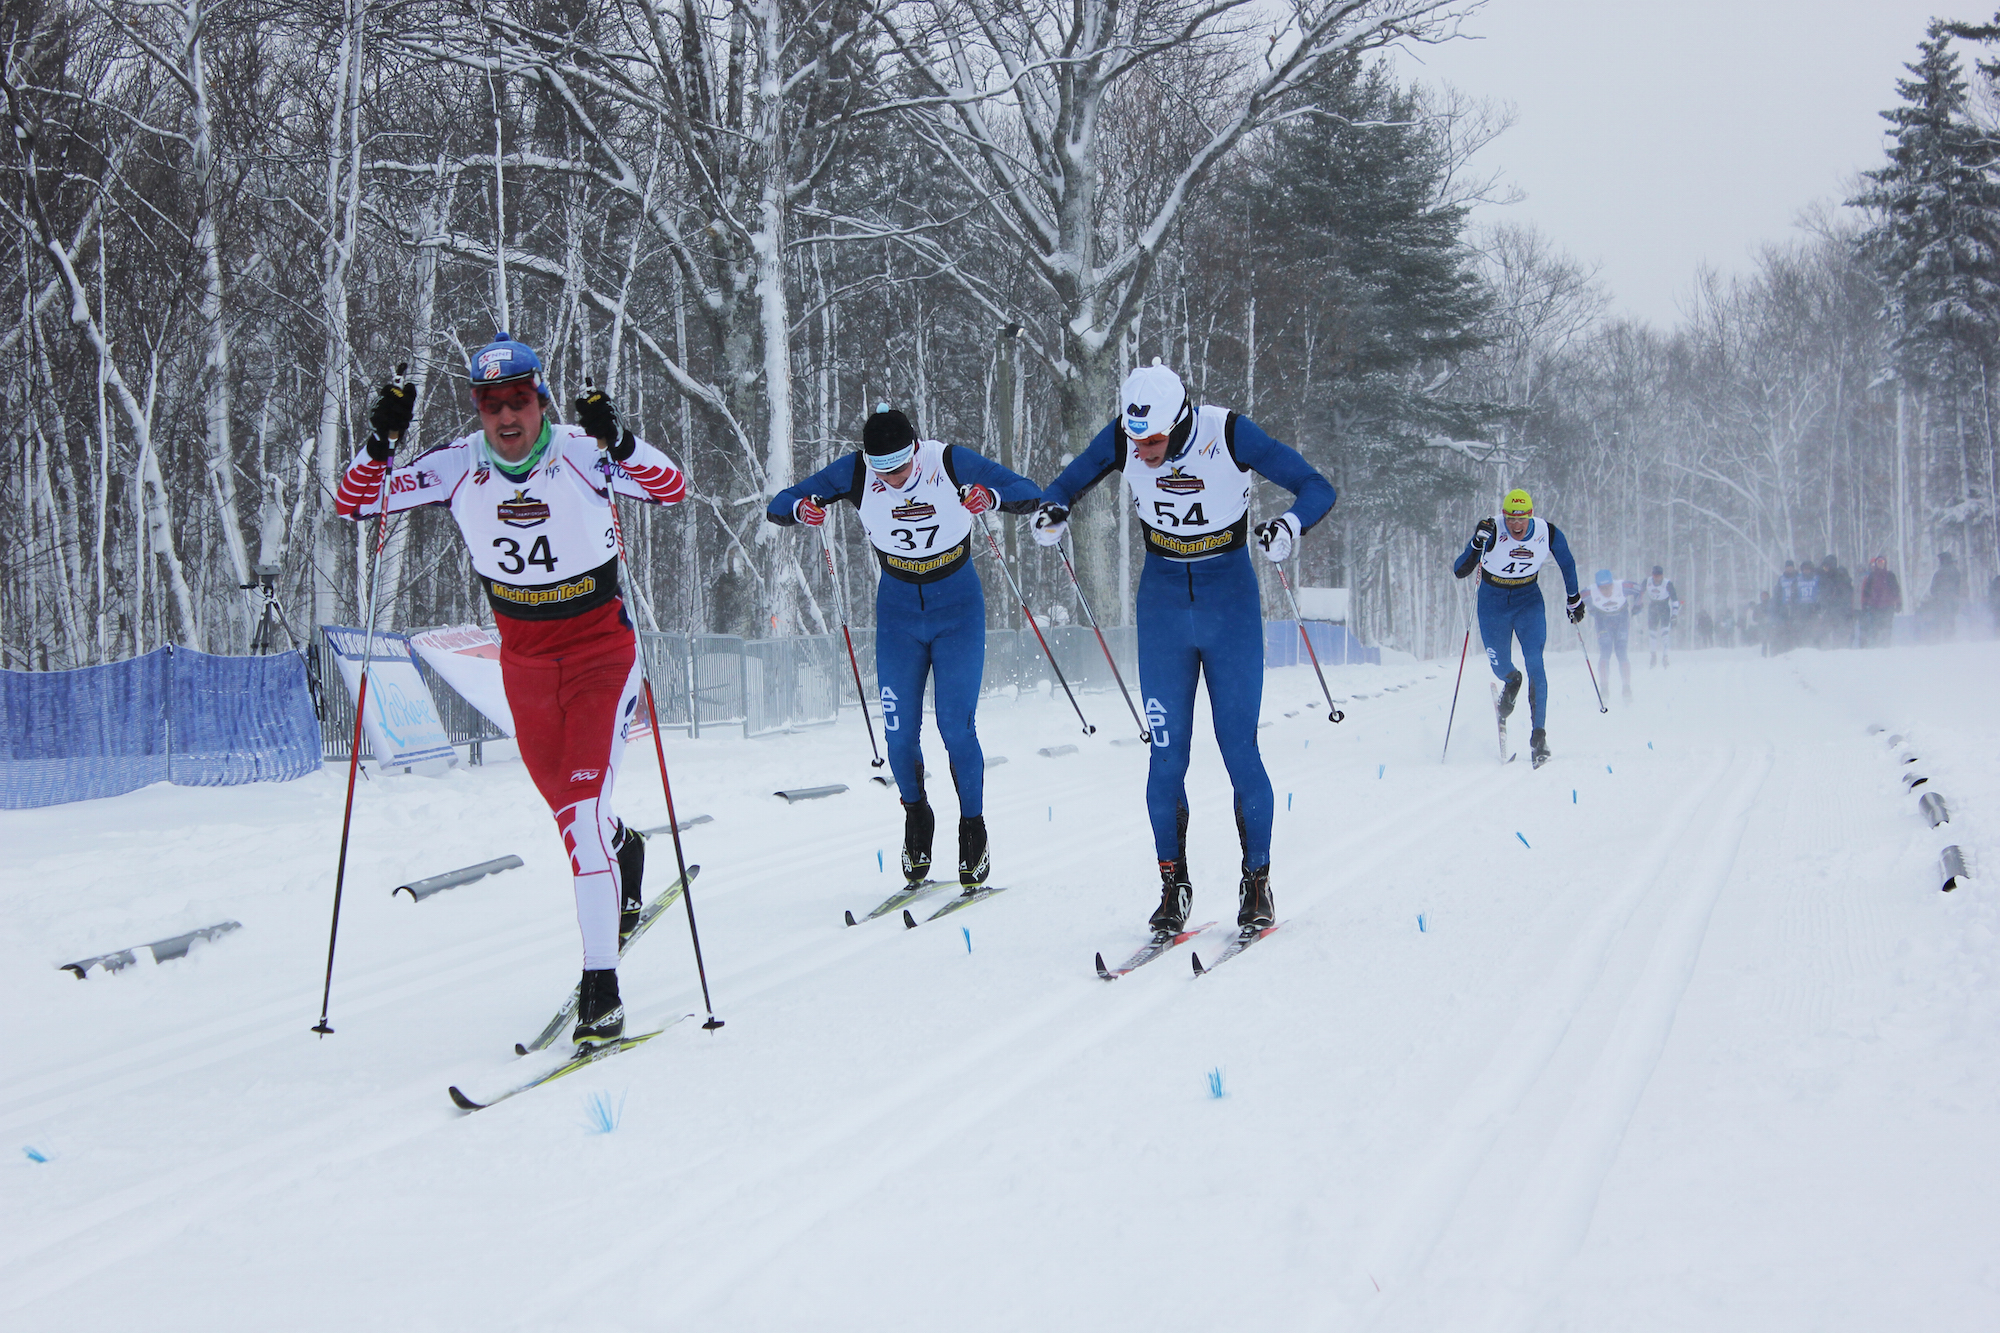 Men's 1.5 k classic sprint at the 2015 U.S. Cross Country Championships in Houghton, Mich.